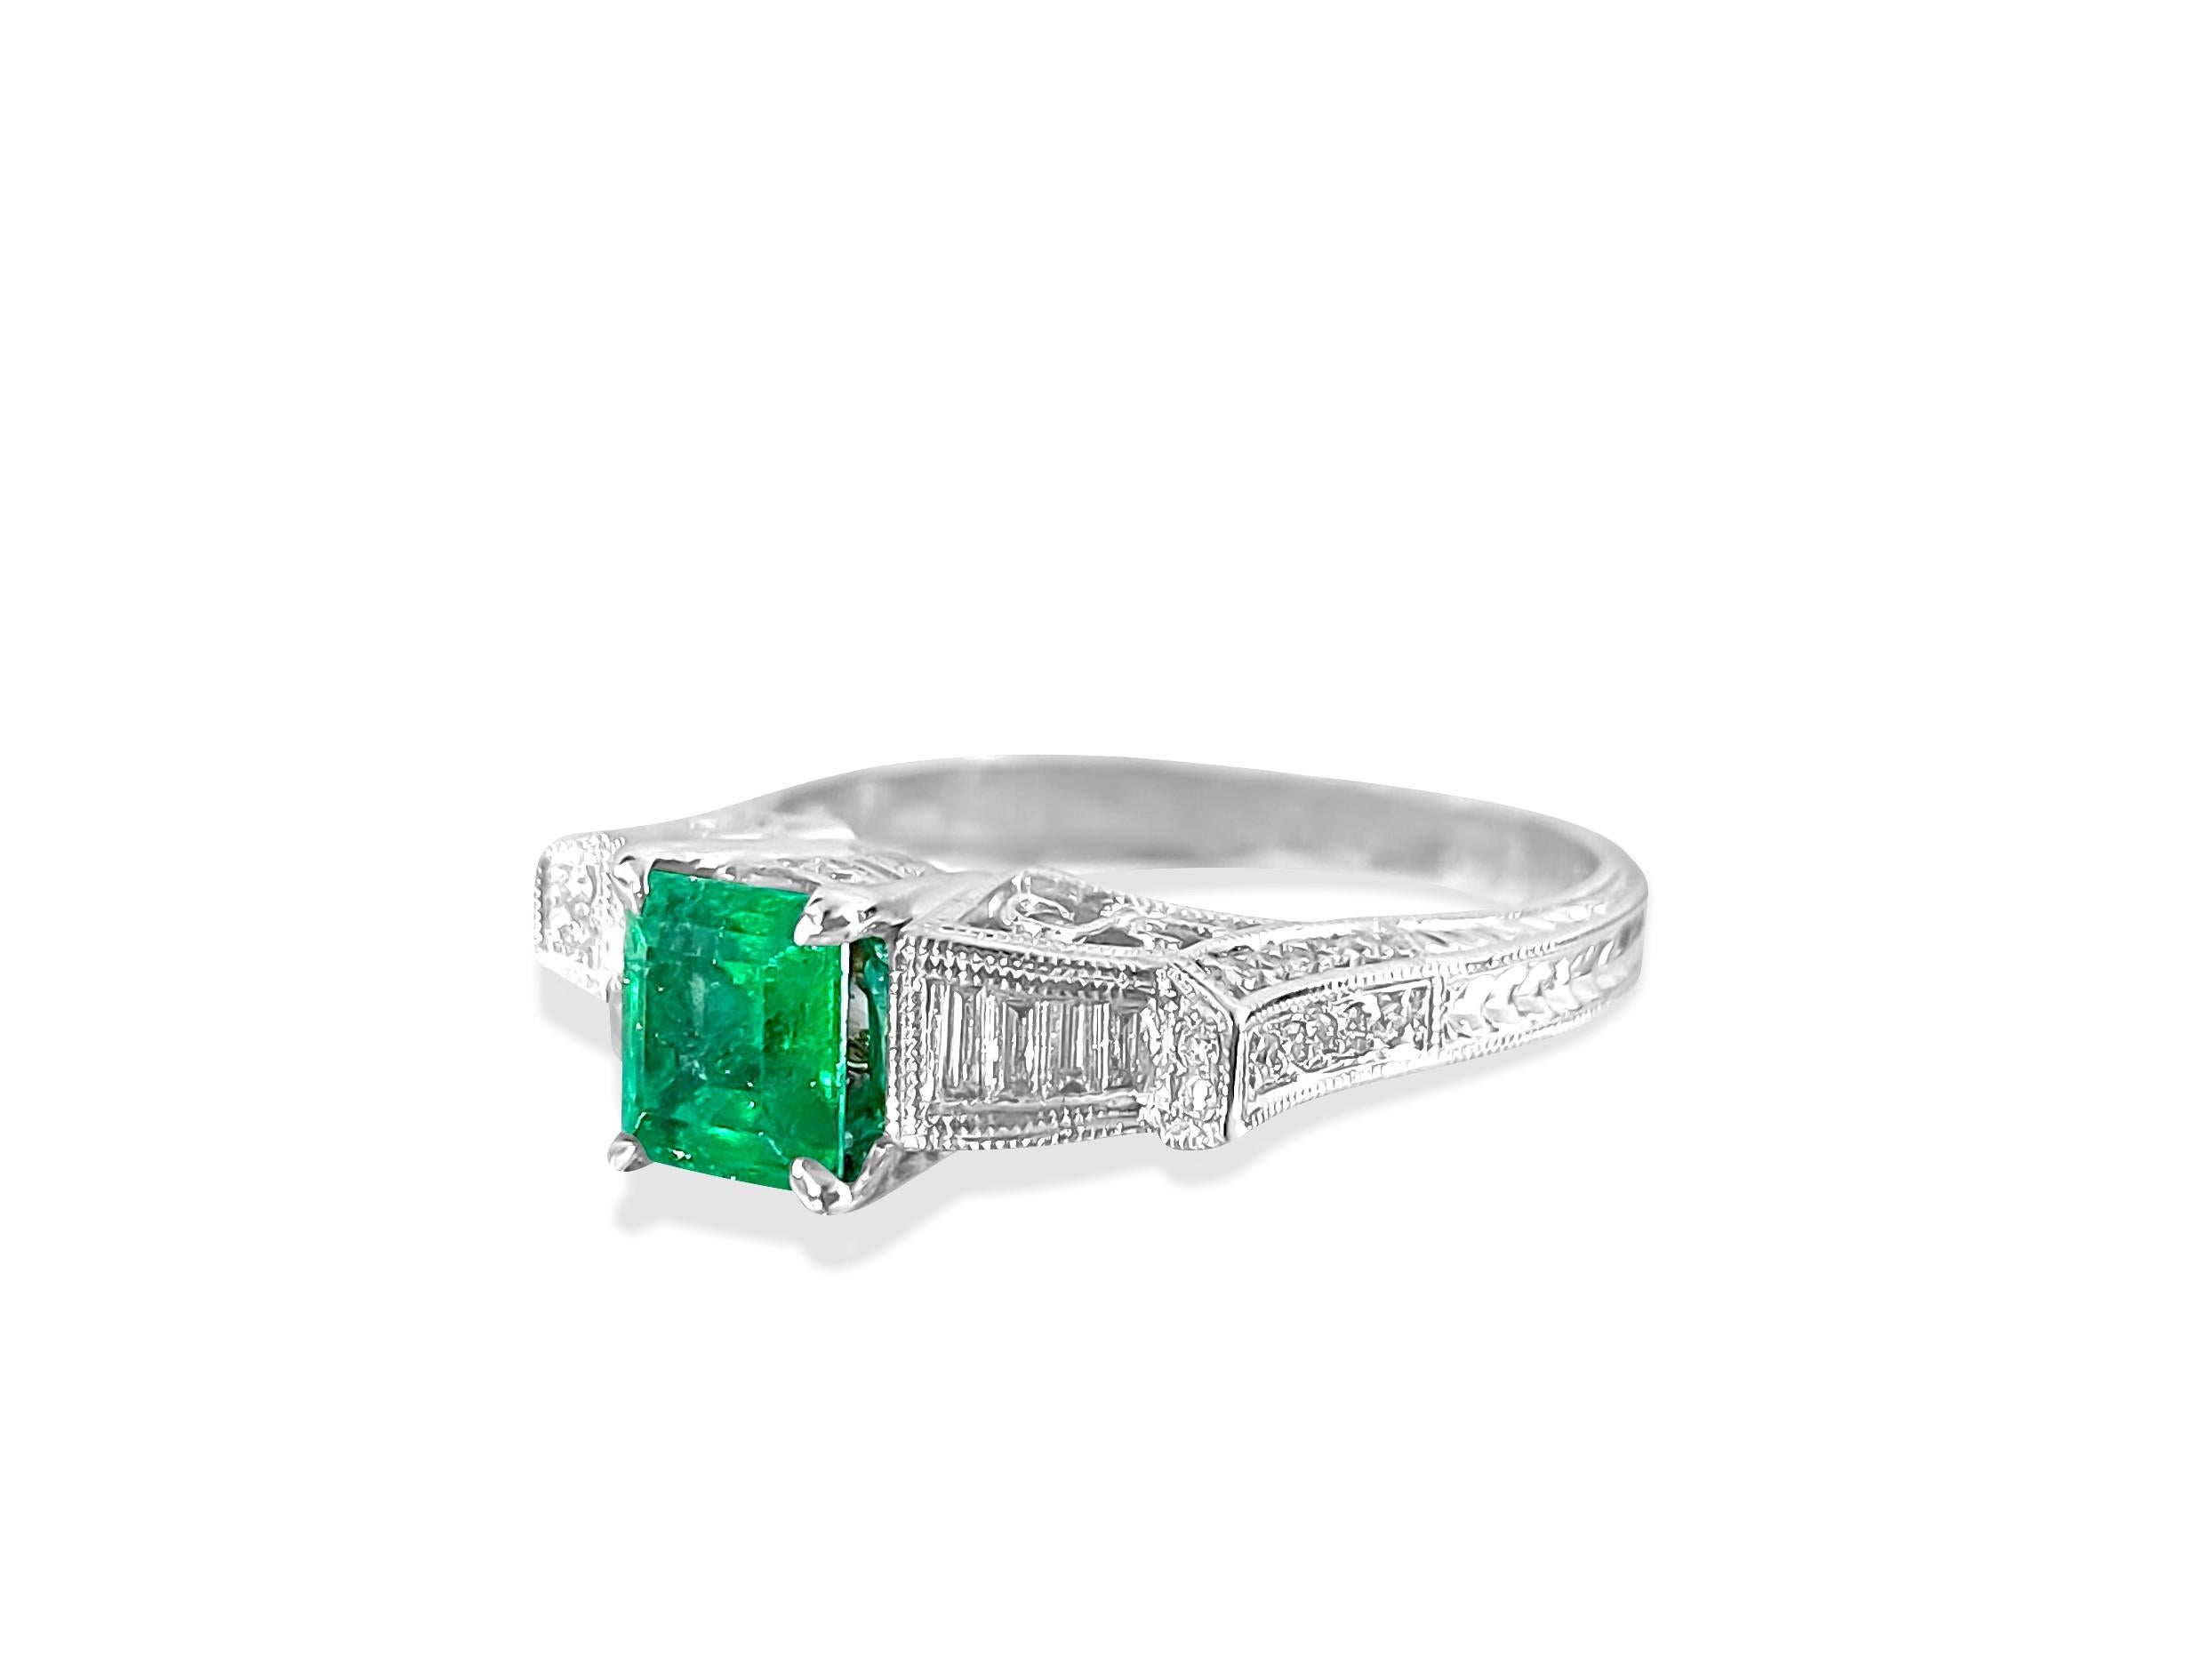 Metal: 14K white gold. 
Center: 1.50 carat emerald. 100% natural earth mined Colombian Emerald. Cut: Princess. Beautiful saturation and color. 

Side diamonds: 0.30 carat diamonds total. VS clarity and F color diamonds. Baguette cut and round